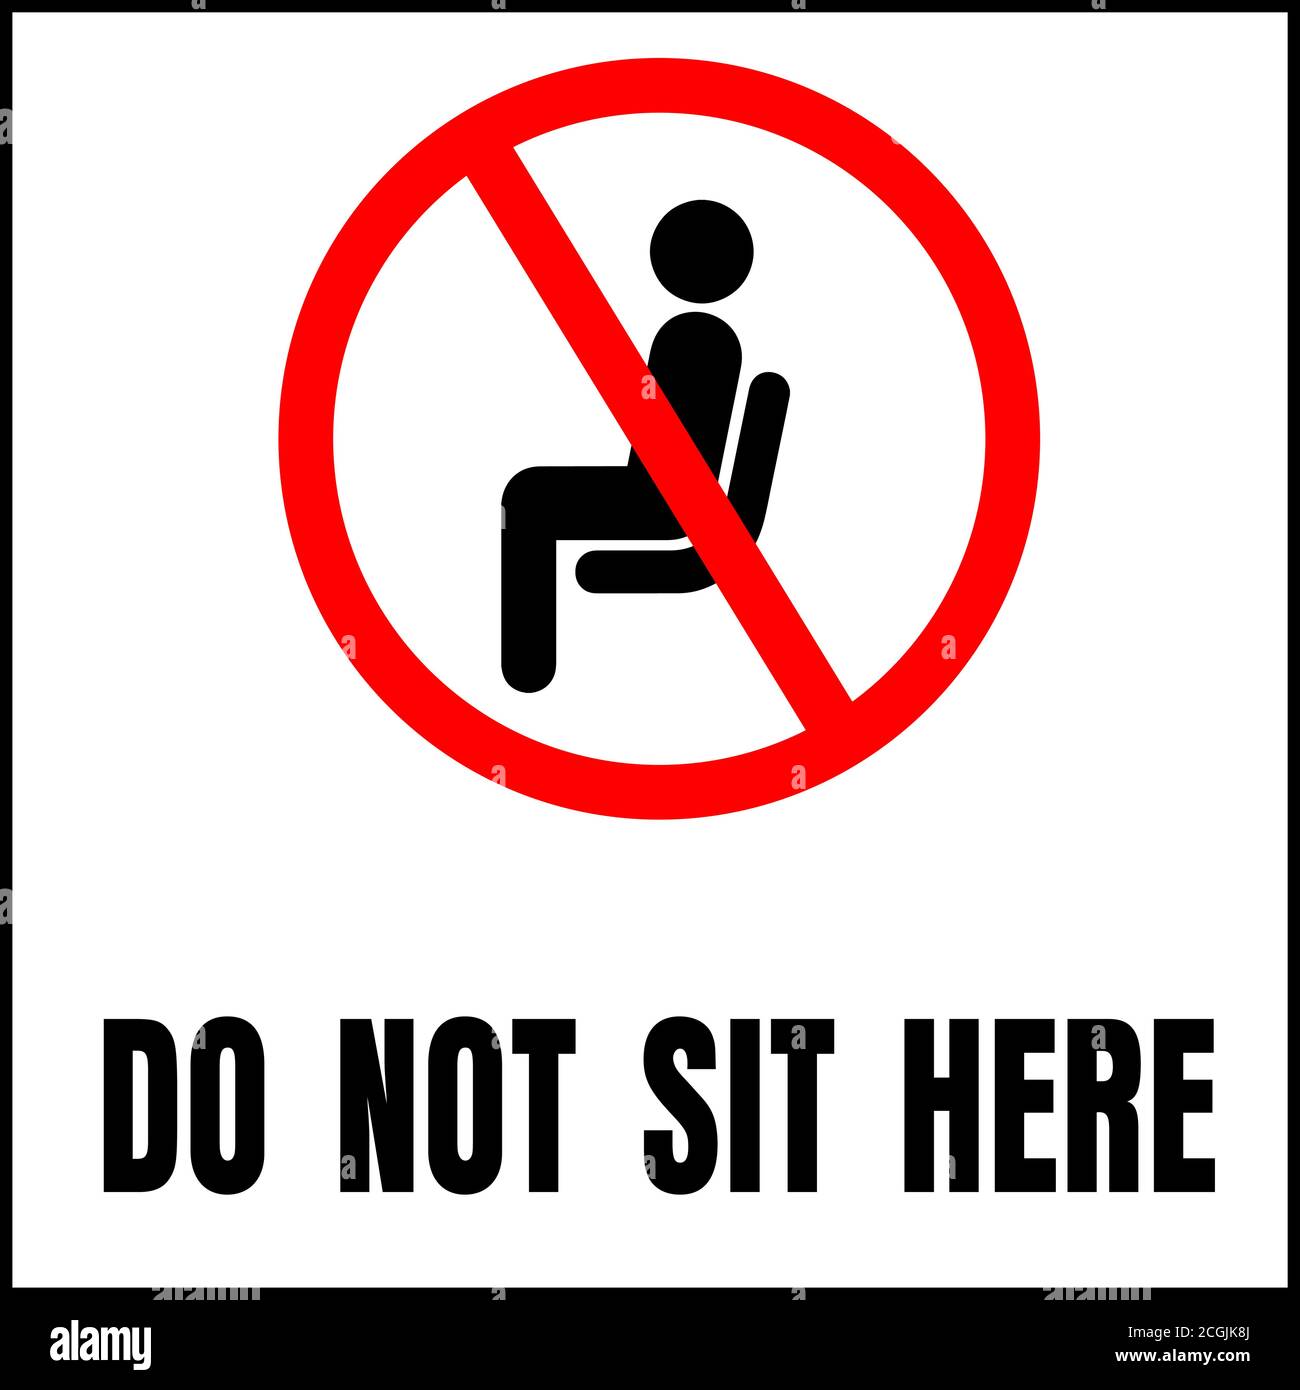 Do not sit here sign for public places to encourage social distancing. Stock Vector